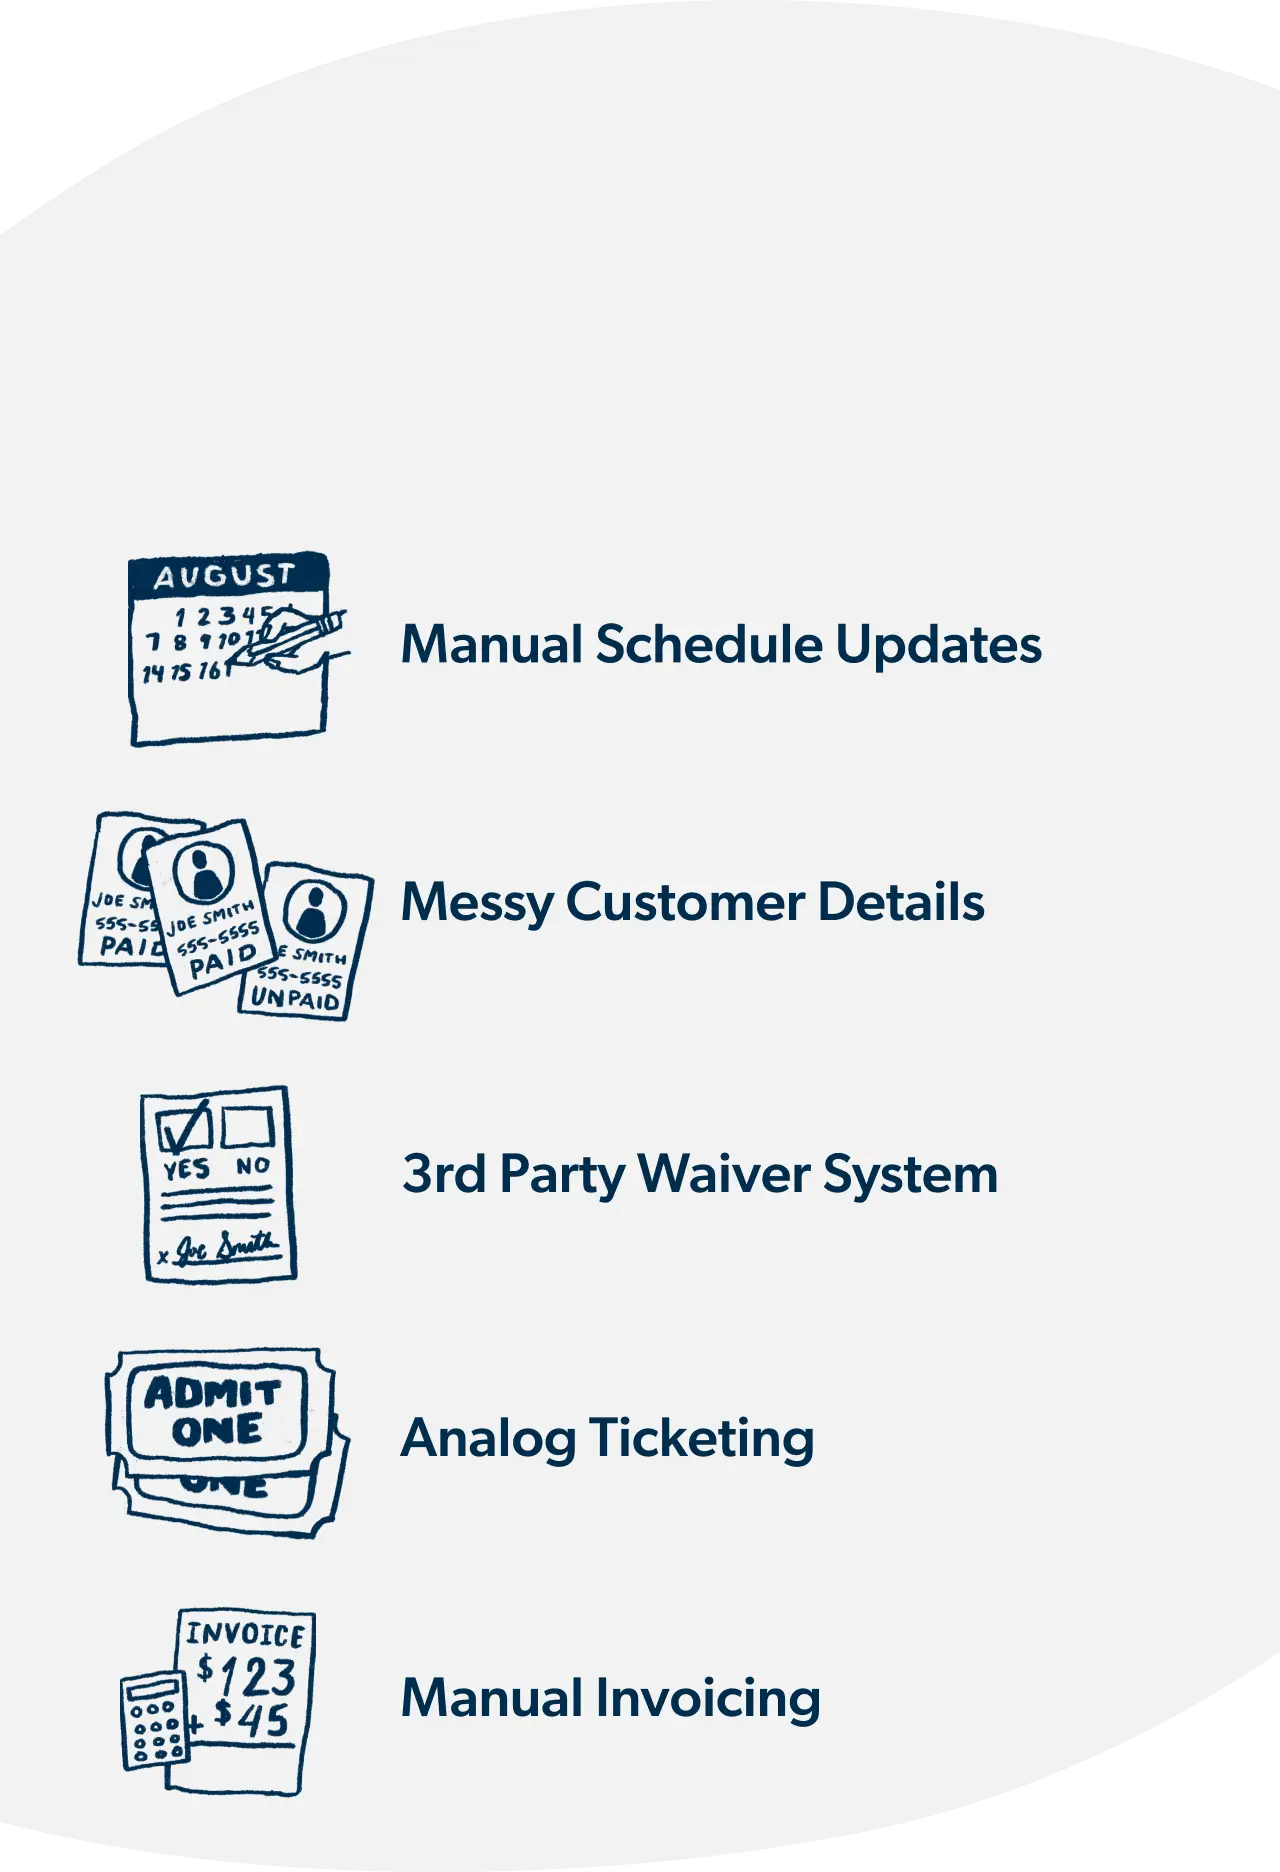 Small drawings with captions: Manual Schedule Update, Messy Customer Details, 3rd Party Waiver System, Analog Ticketing, Manual Invoicing